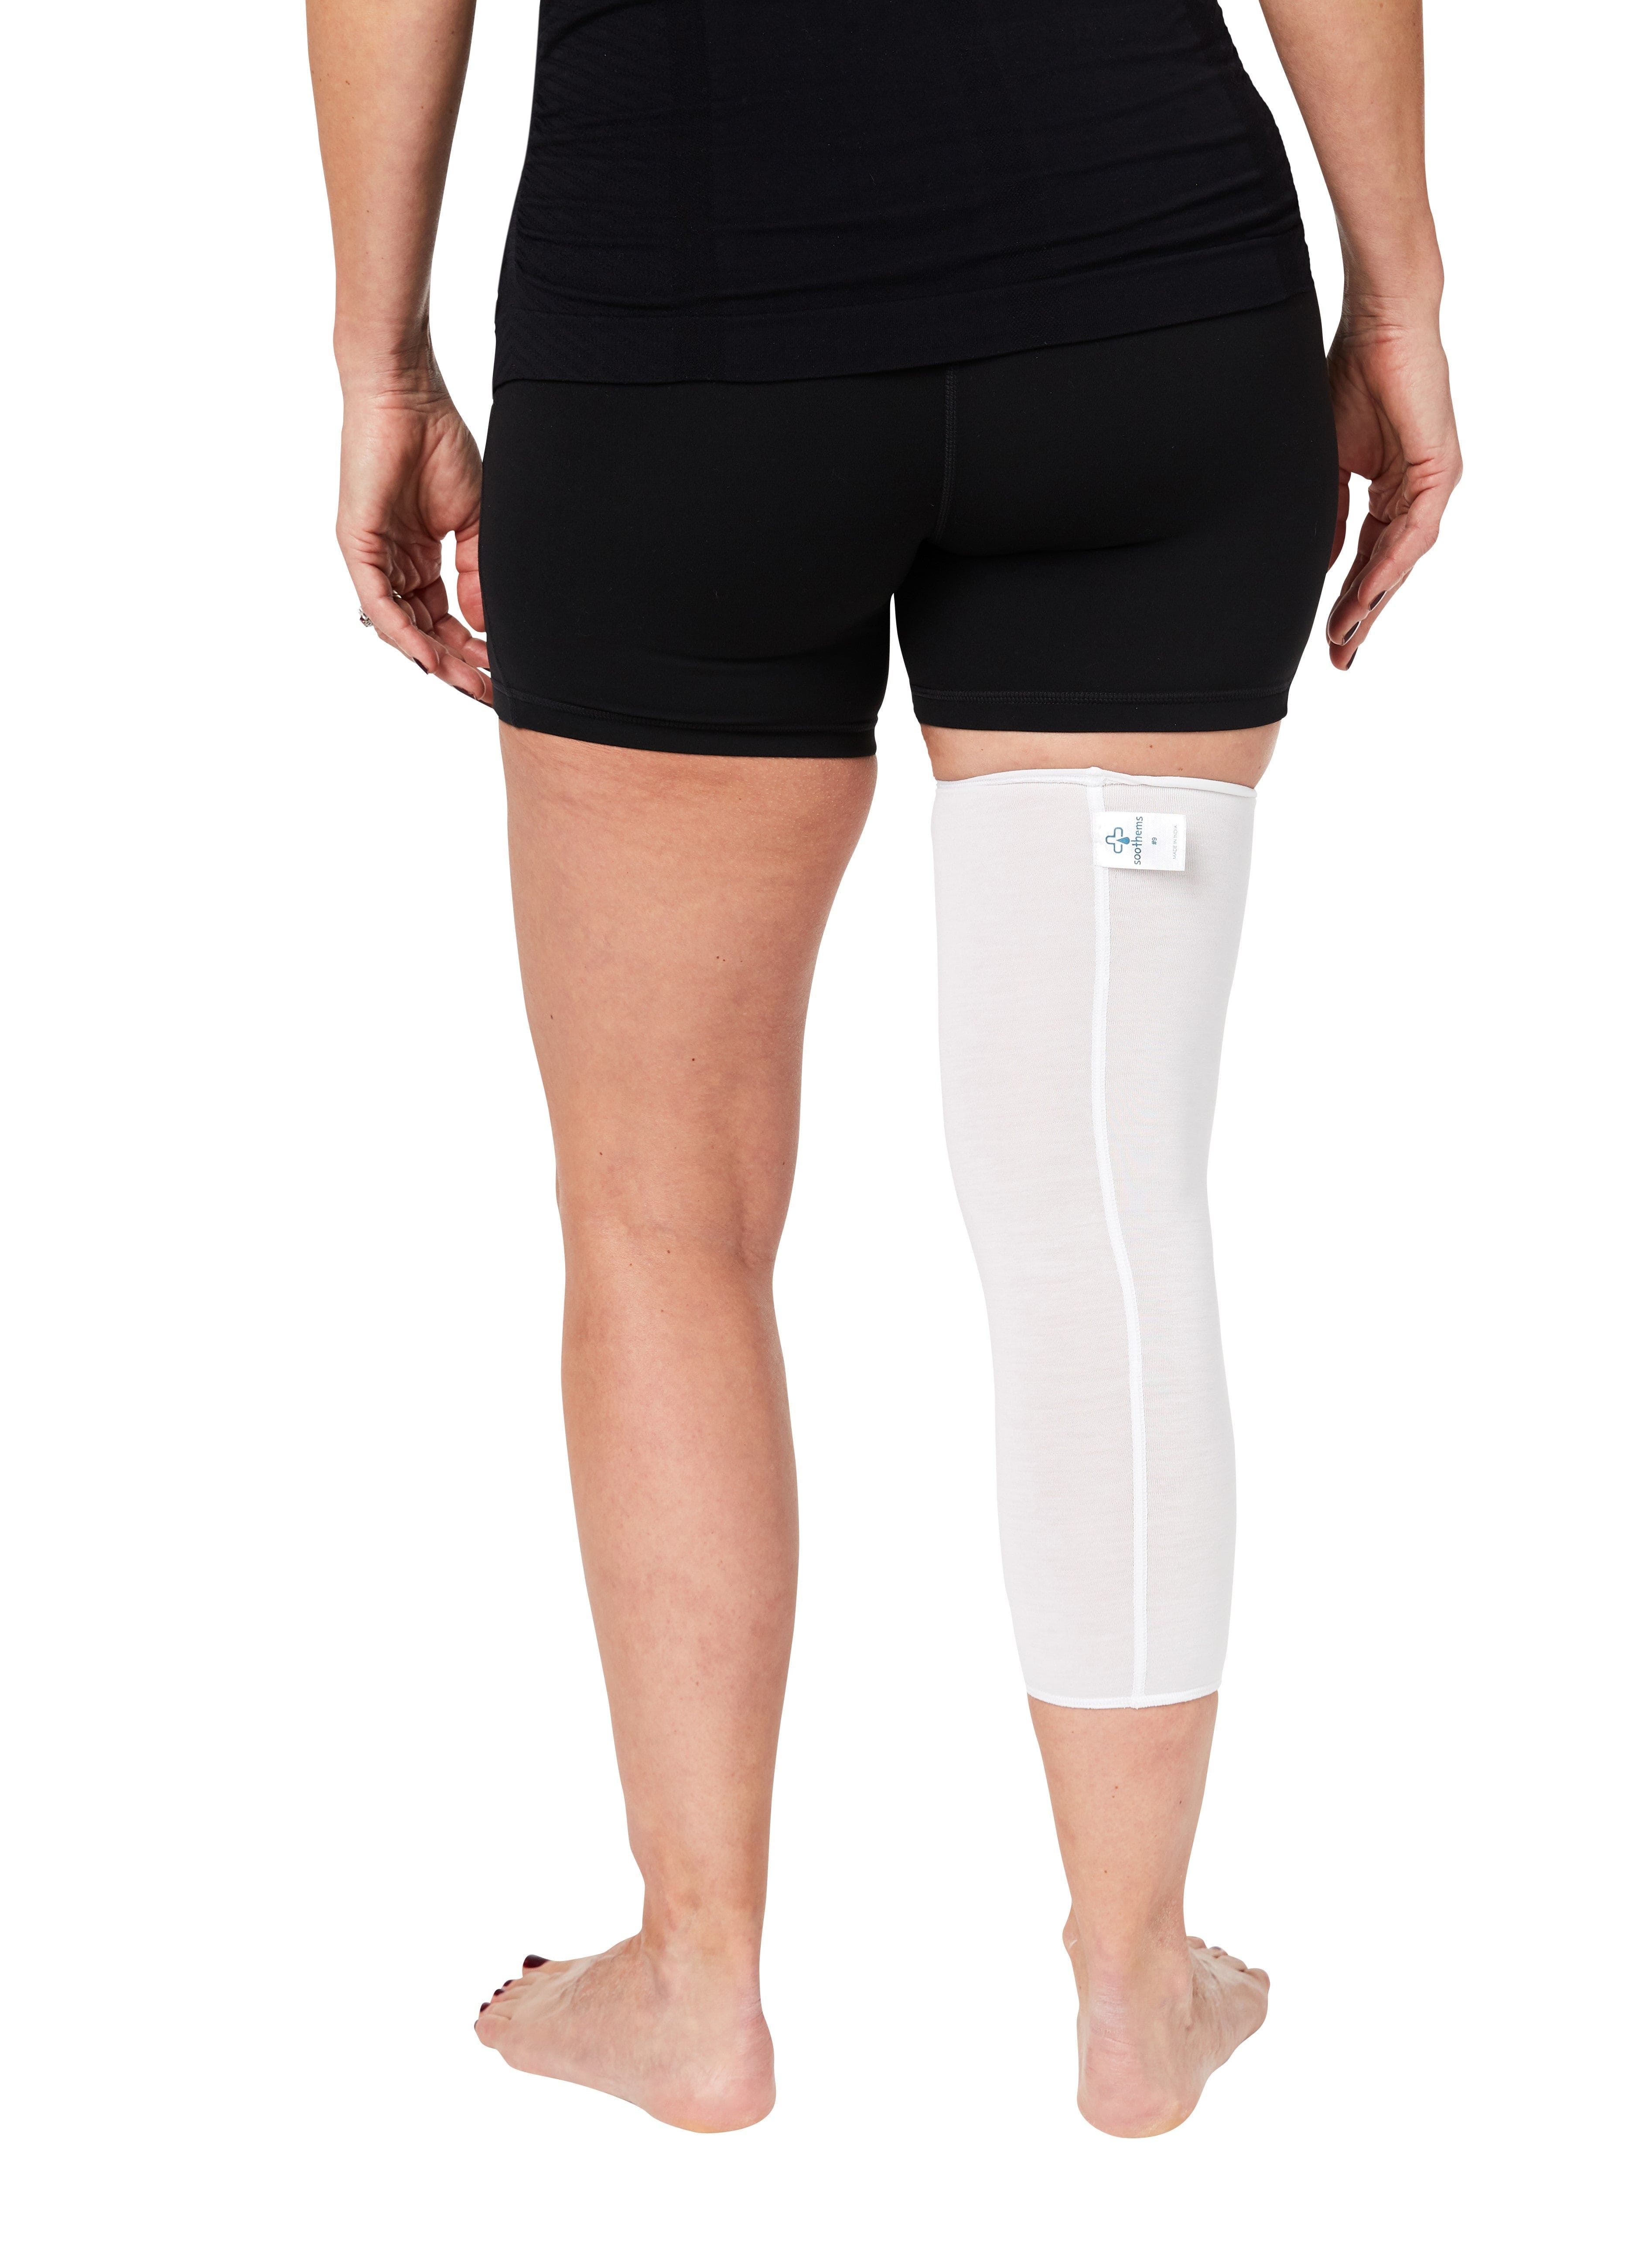 Soothems Eczema Sleeves for Adults | Arm or Leg Sleeves for Wet Wrap Therapy & Psoriasis Relief | Soothems 10 - Circumference under 22" / White